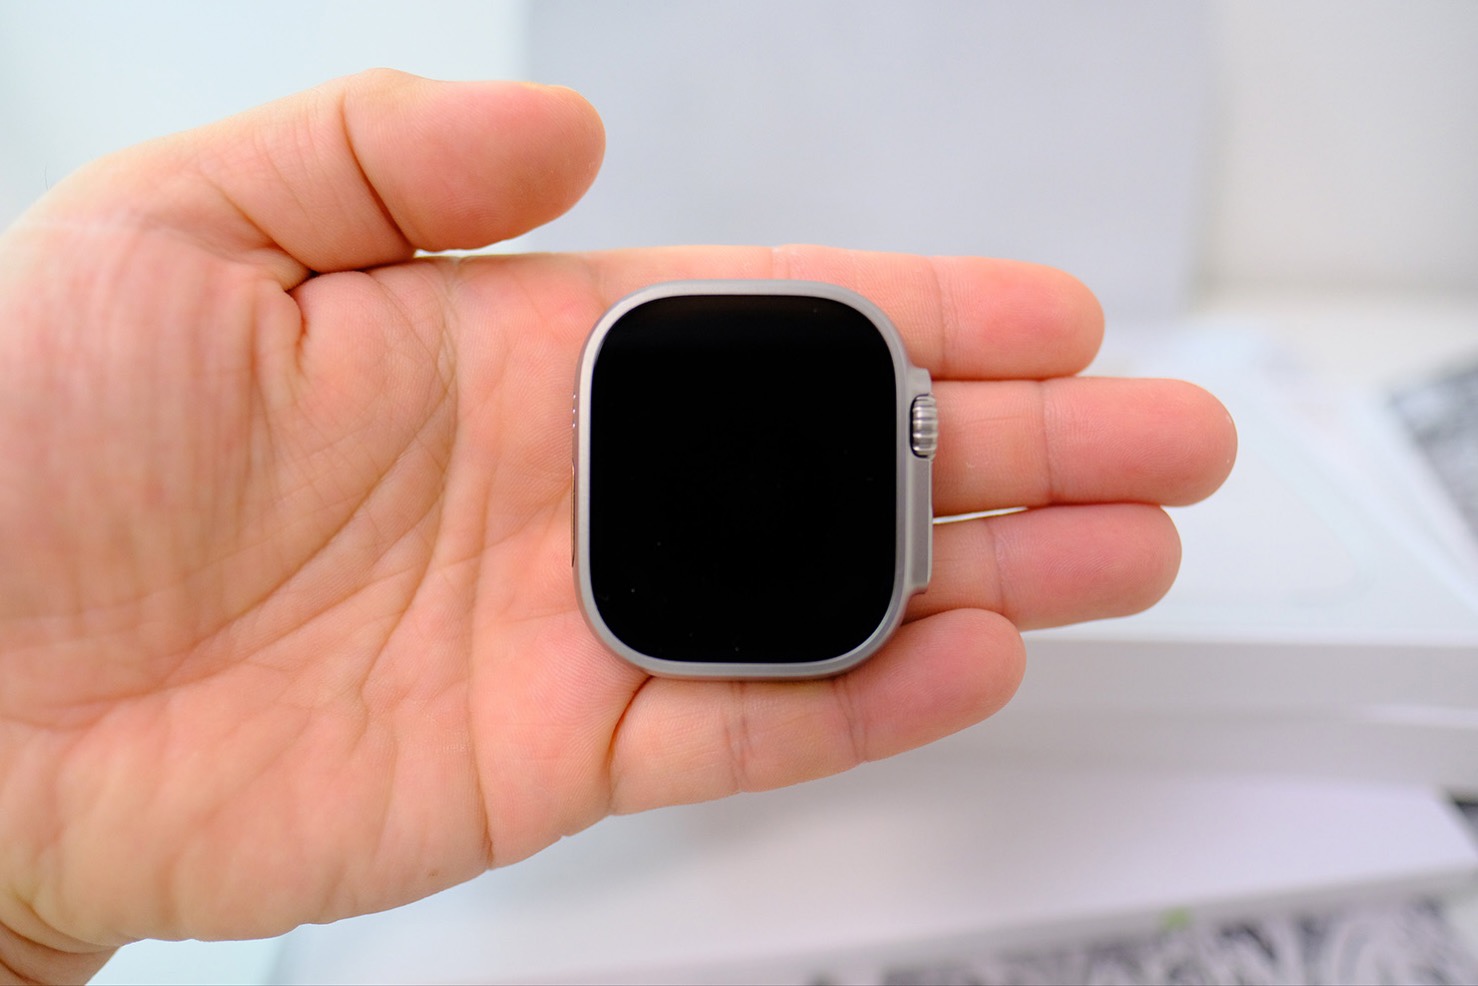 Applewatchultra 12